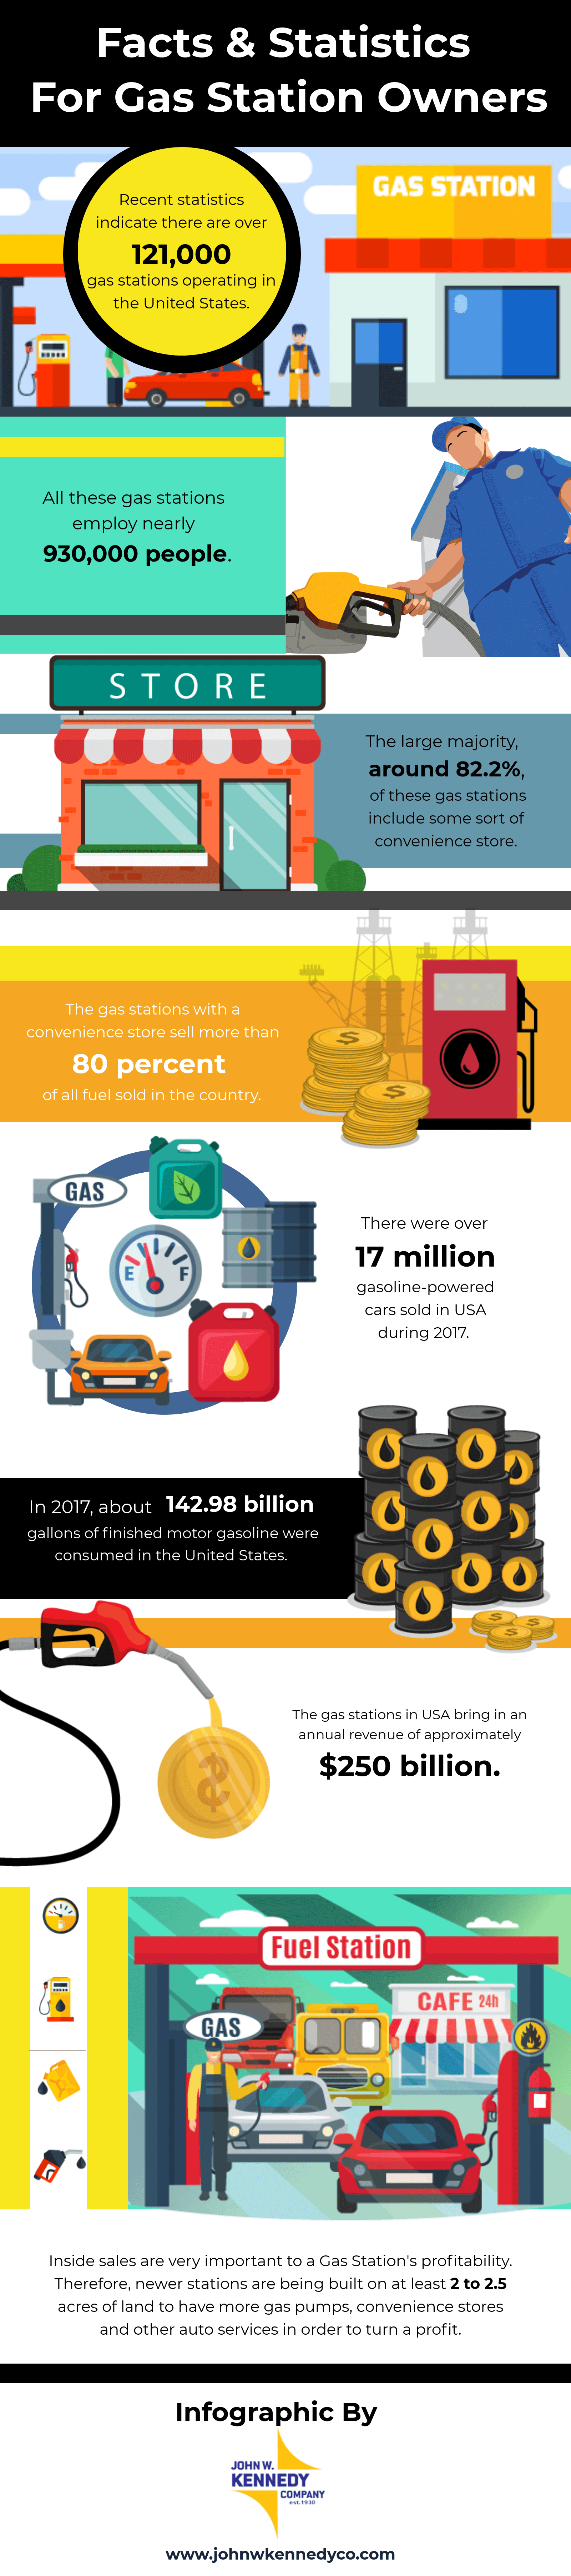 Facts and Statistics for Gas Station Owners